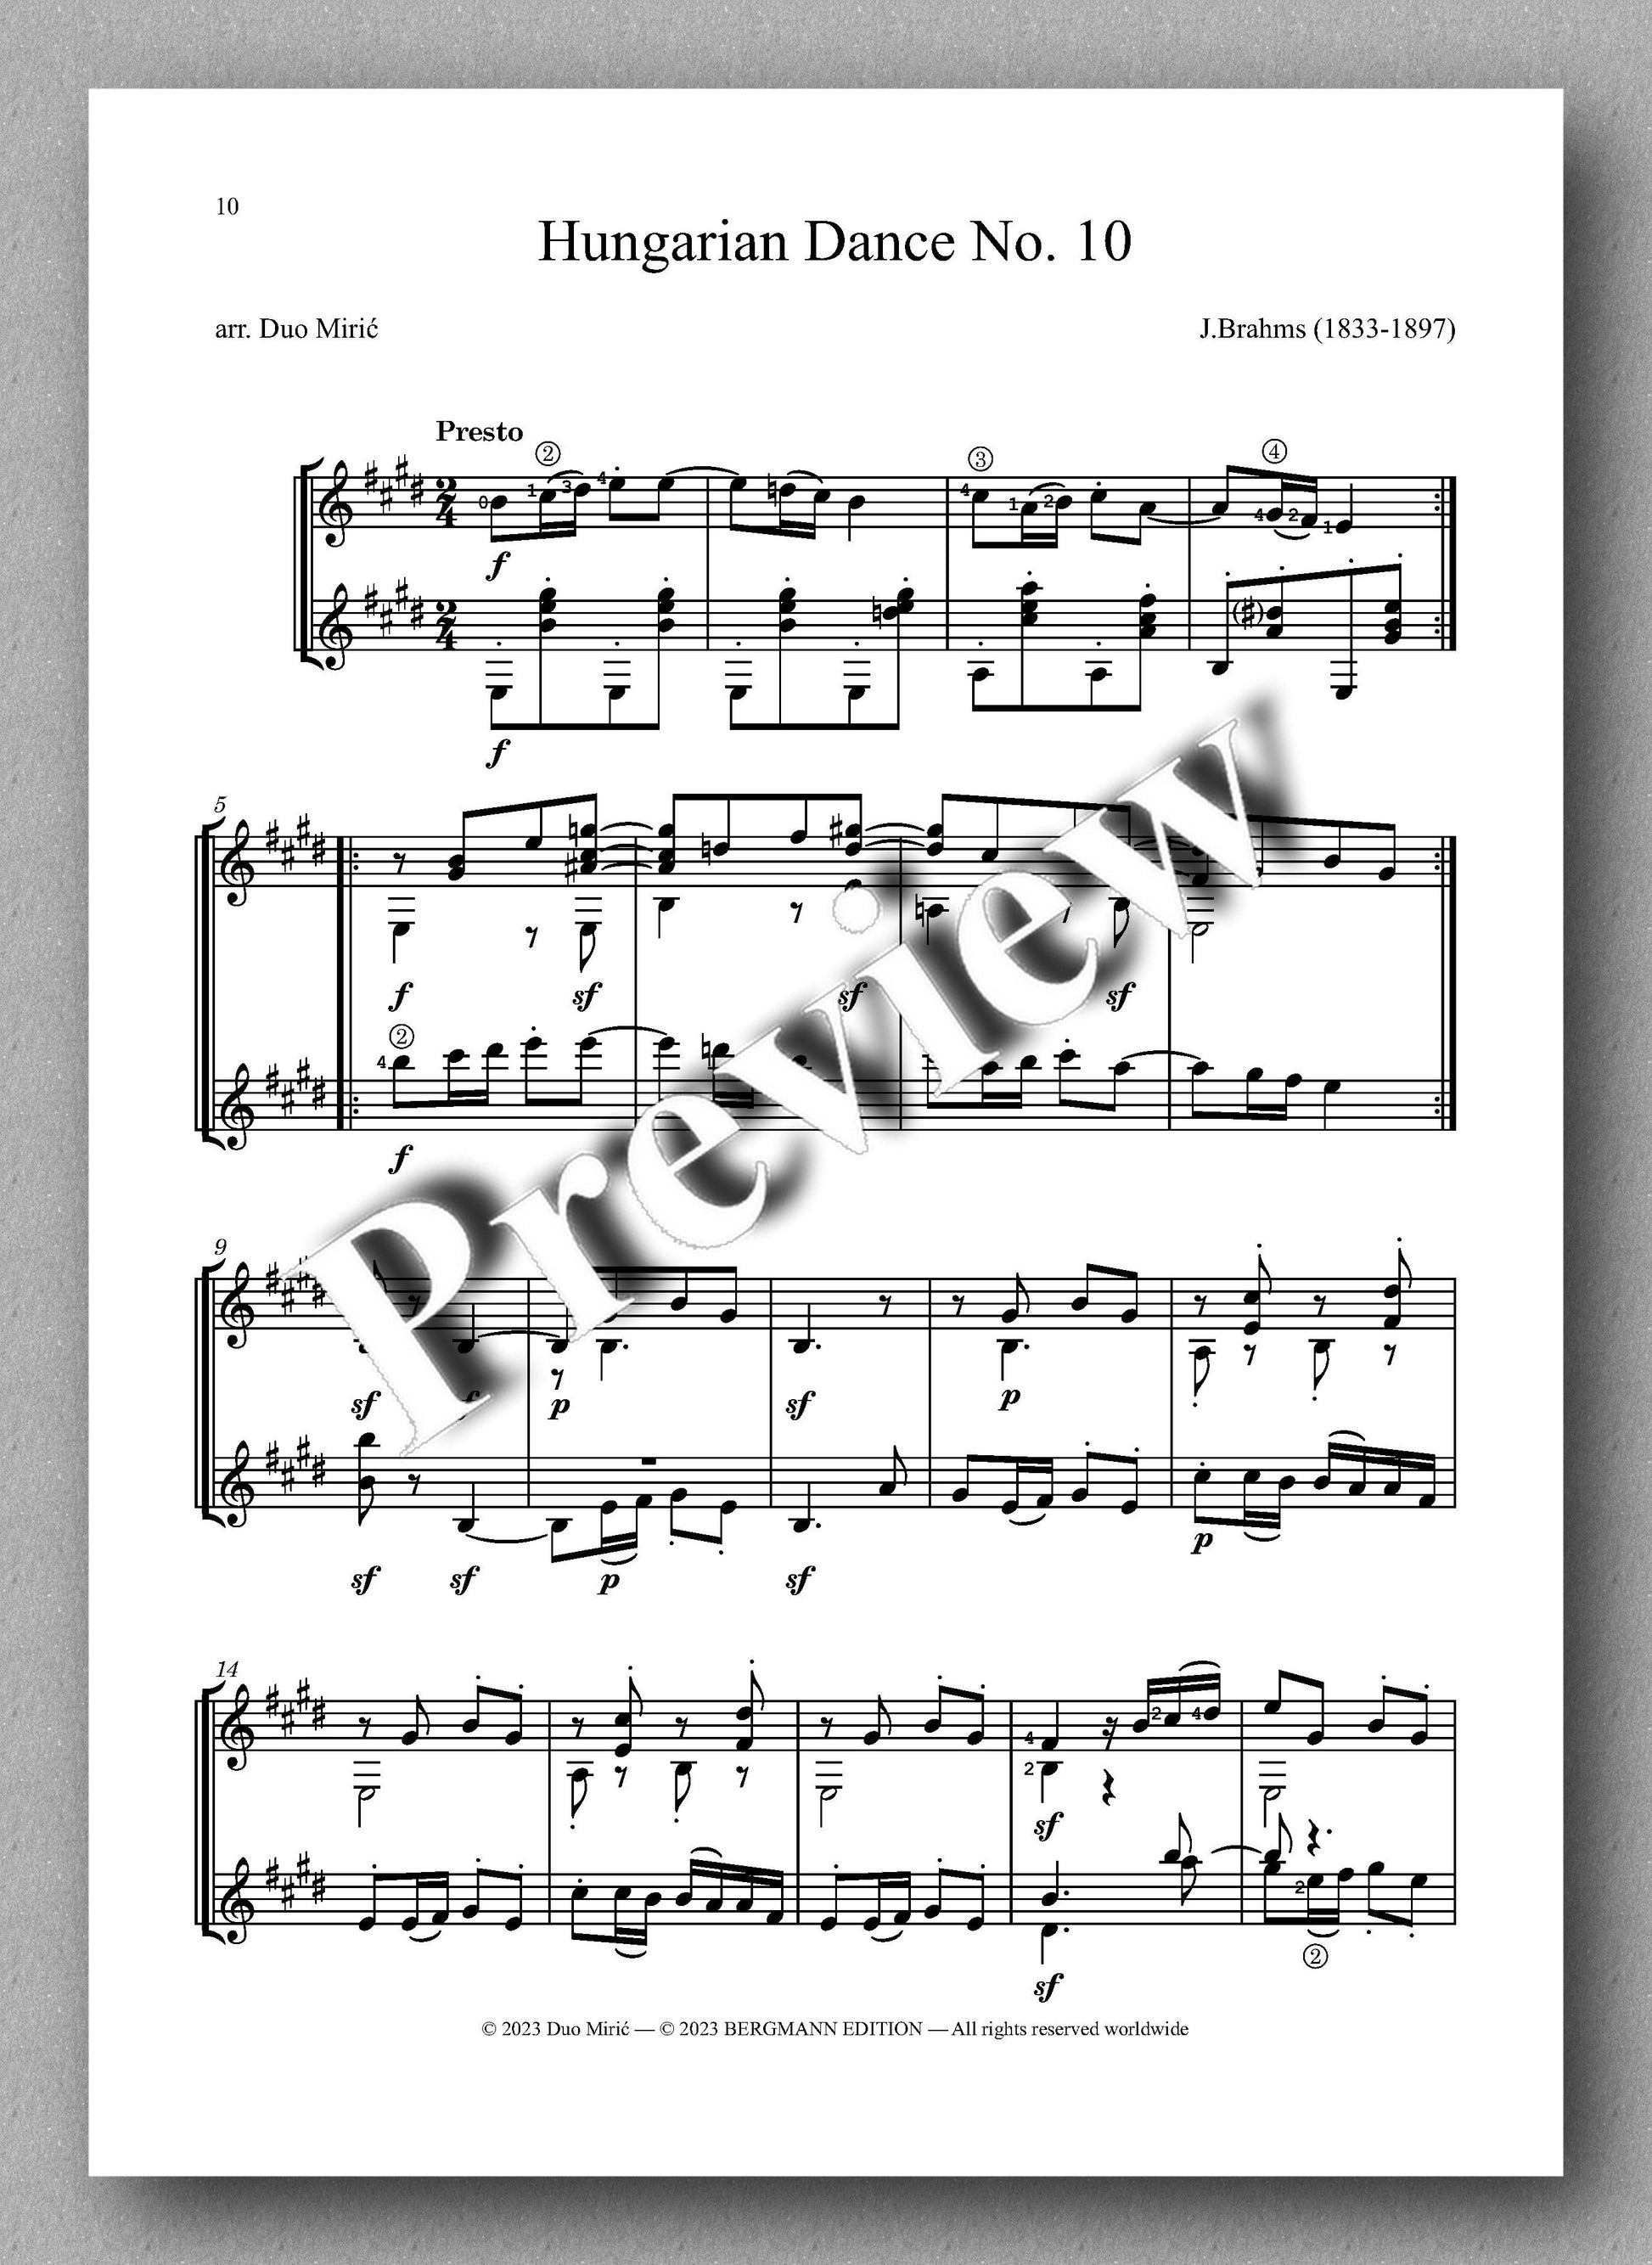 J. Brahms, Three Hungarian Dances, preview of the music score 2